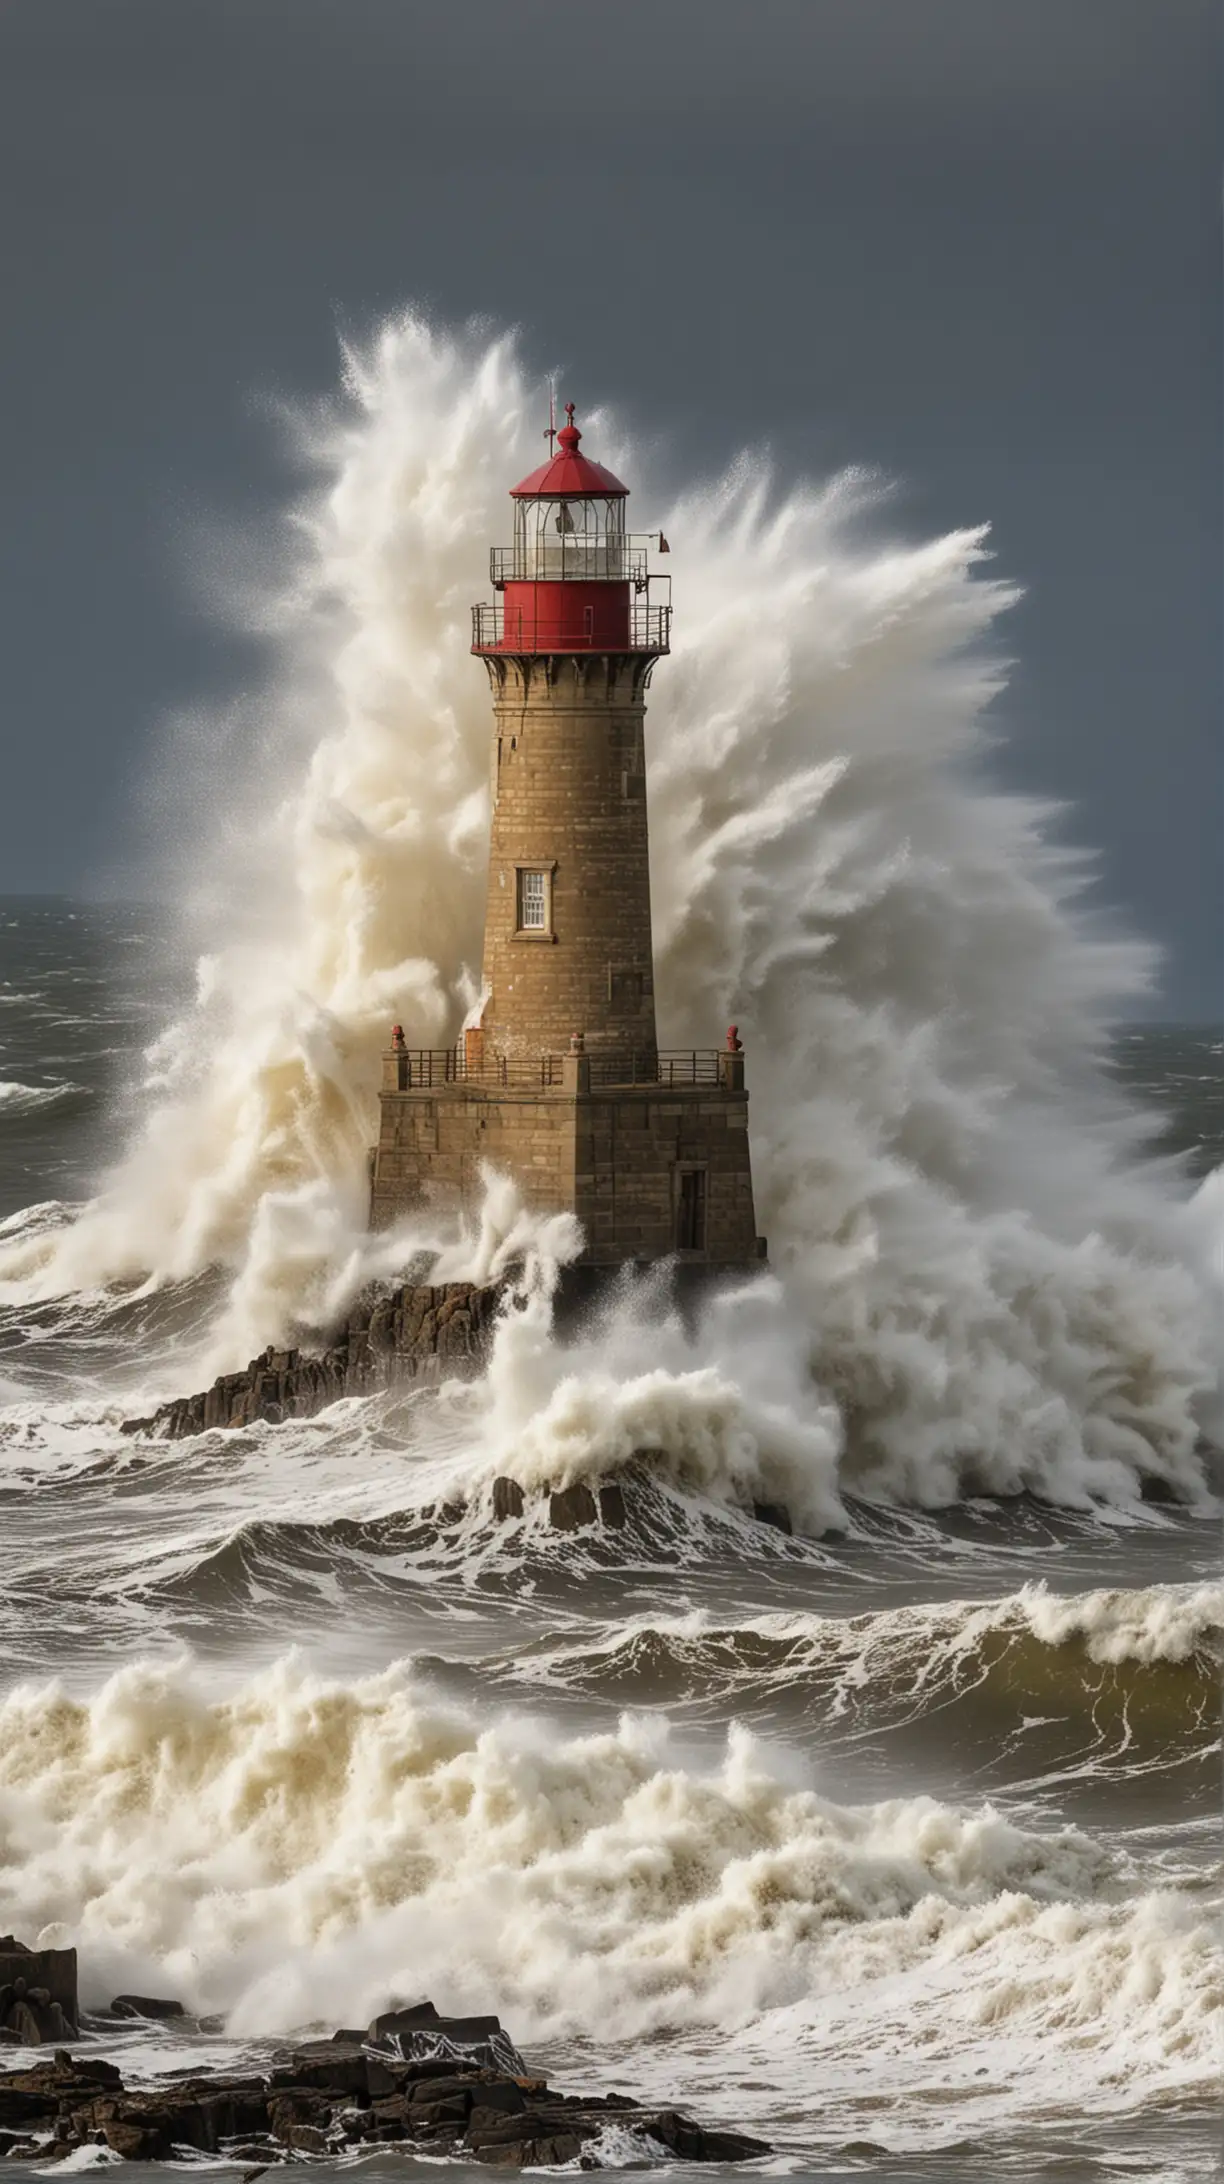 Lighthouse being battered by waves